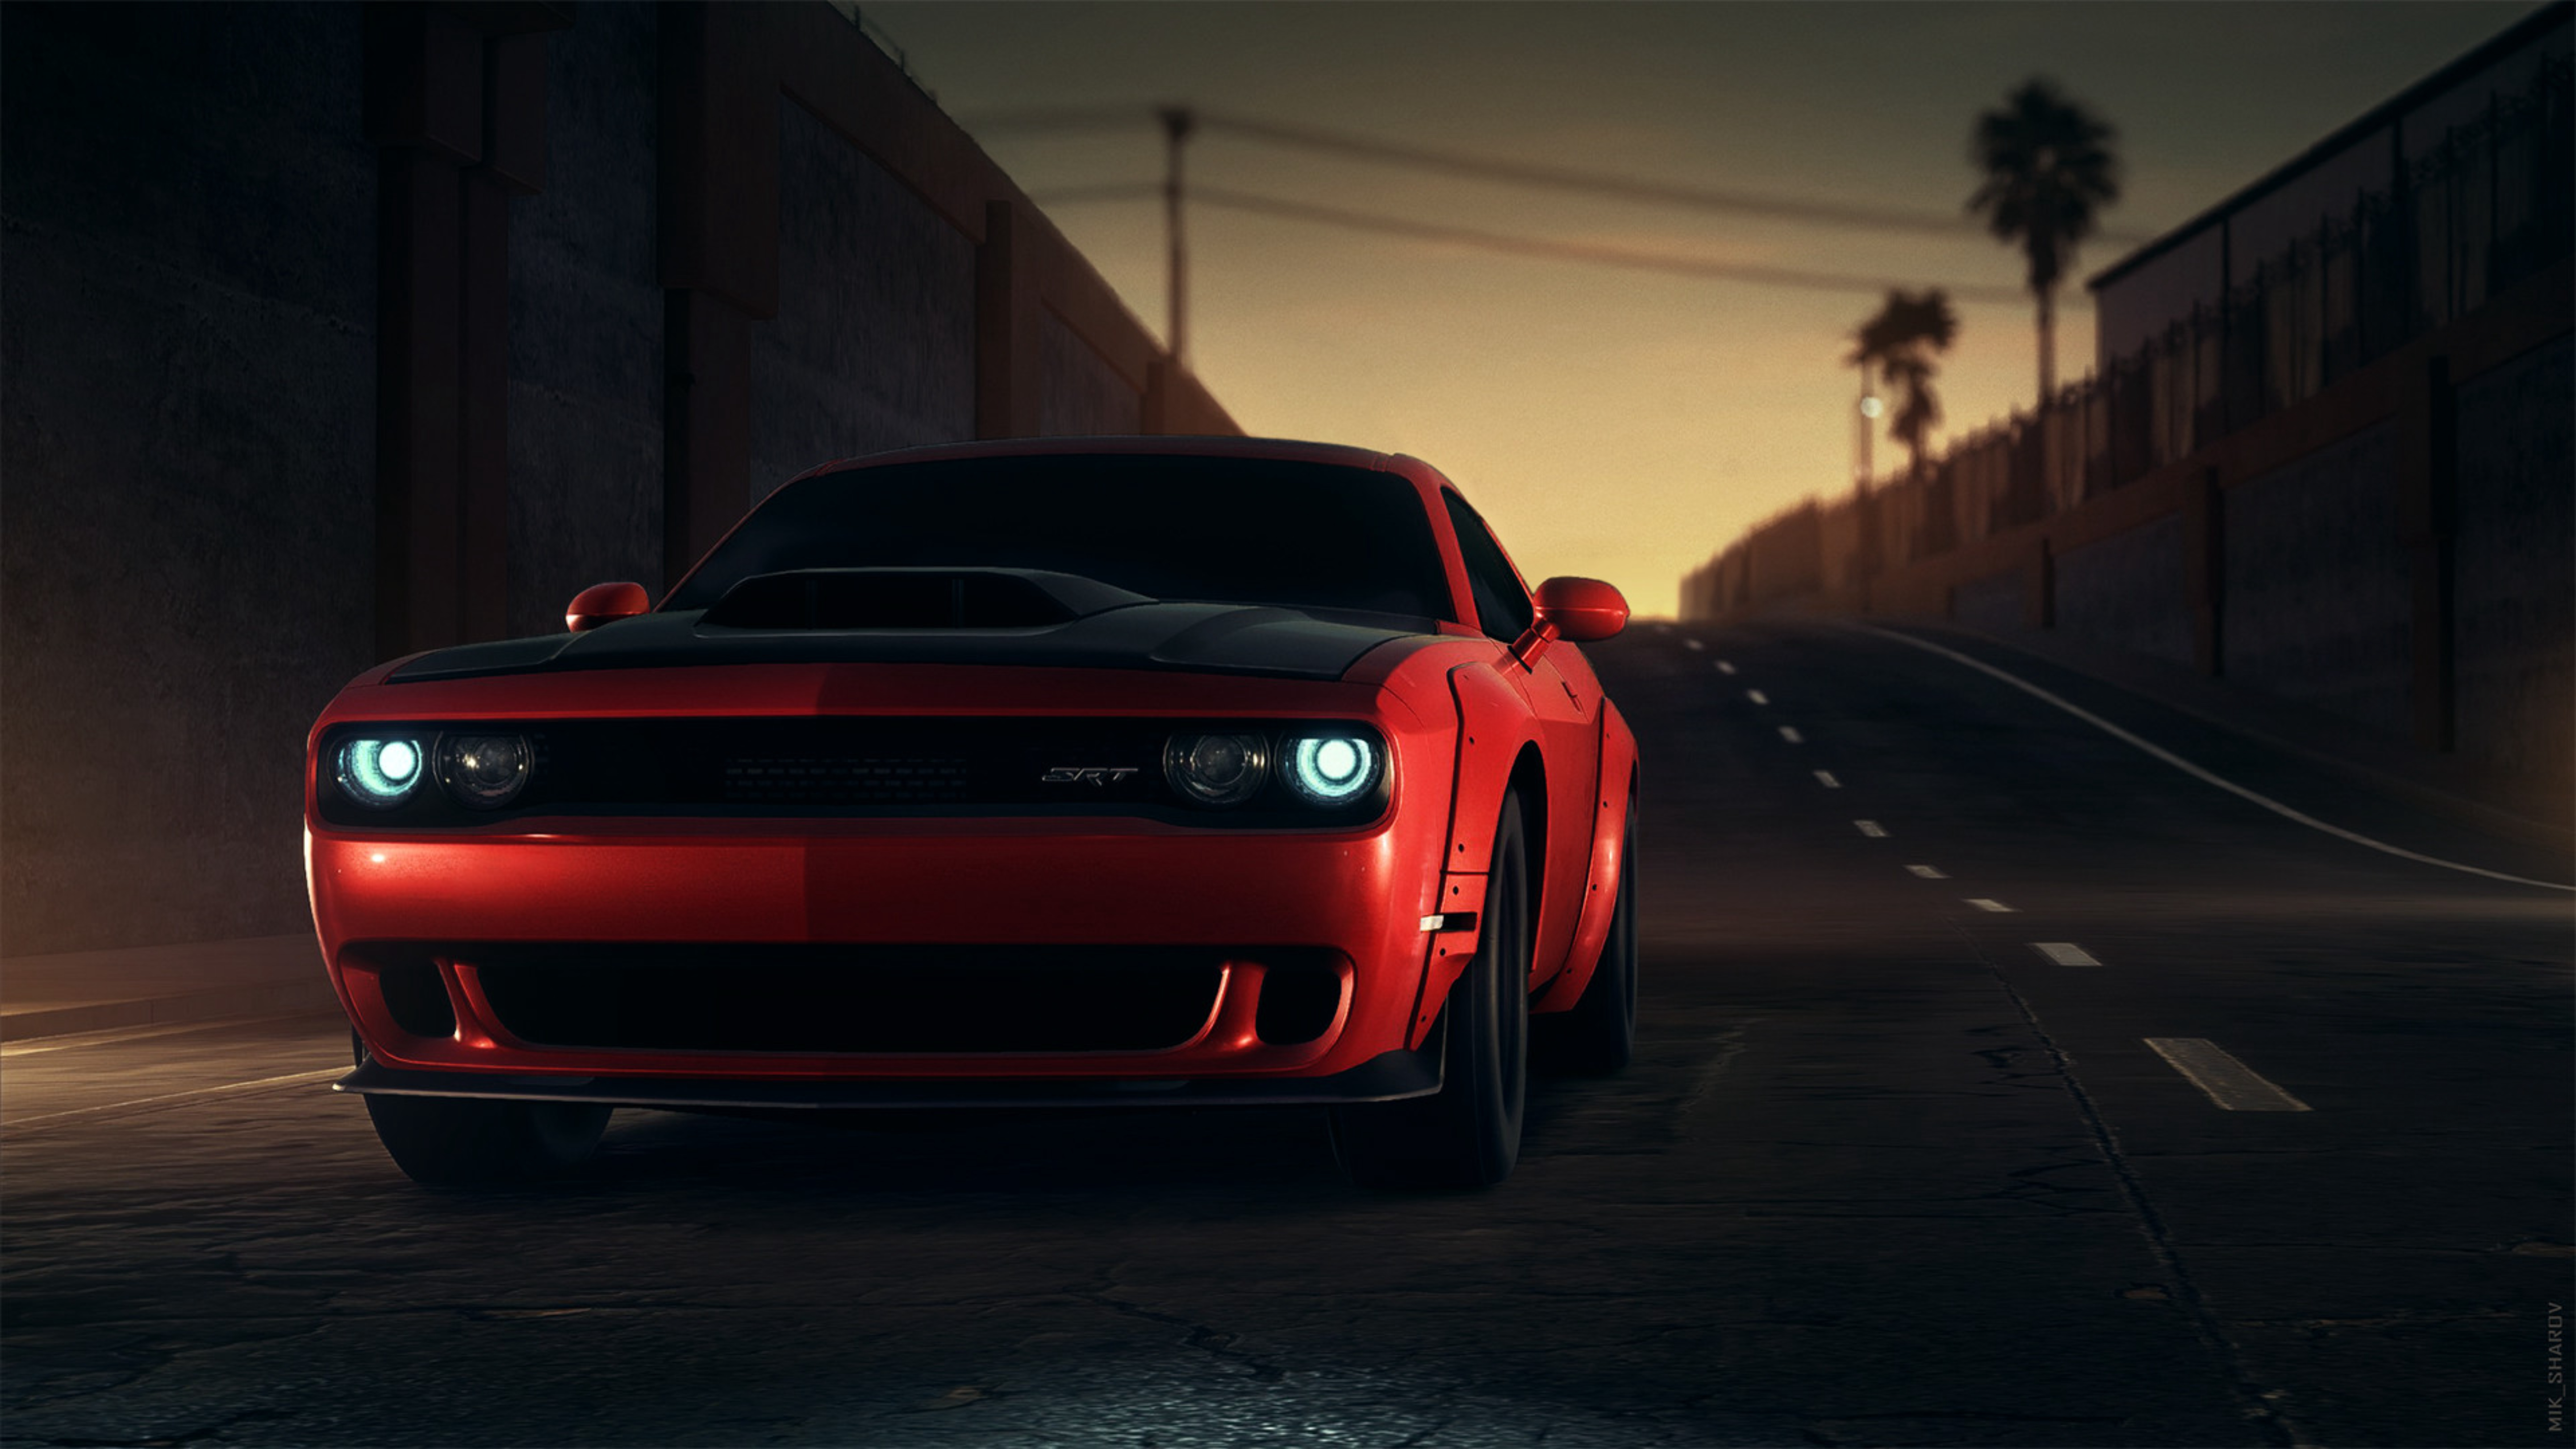 wallpapers cars, sports car, front view, dodge srt, headlights, dodge, sports, red, lights